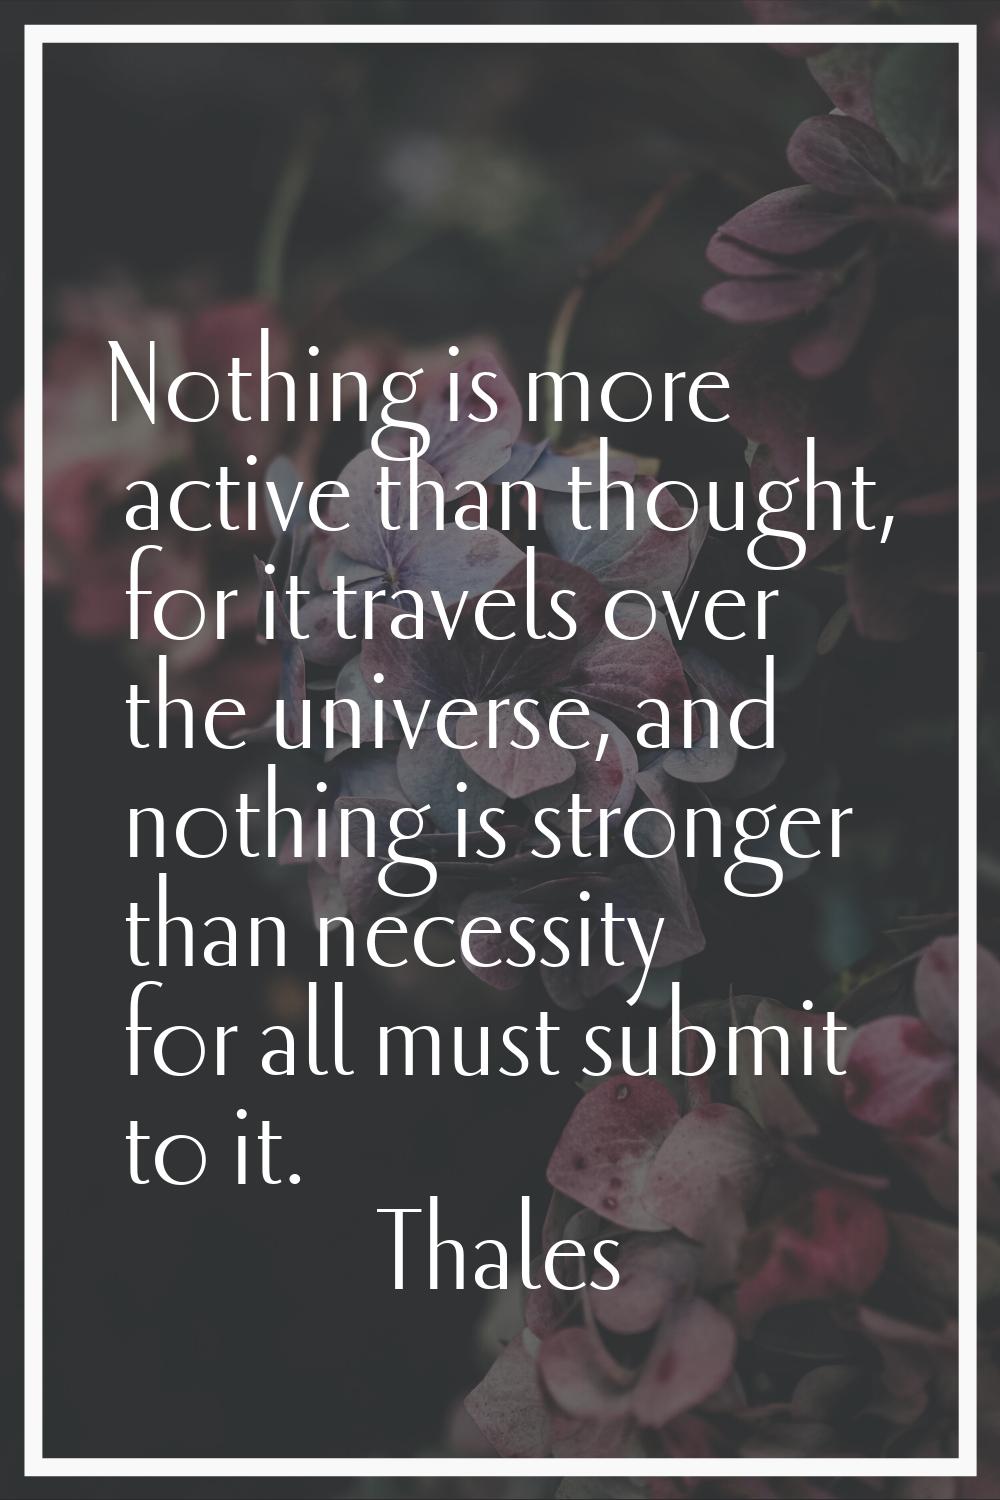 Nothing is more active than thought, for it travels over the universe, and nothing is stronger than